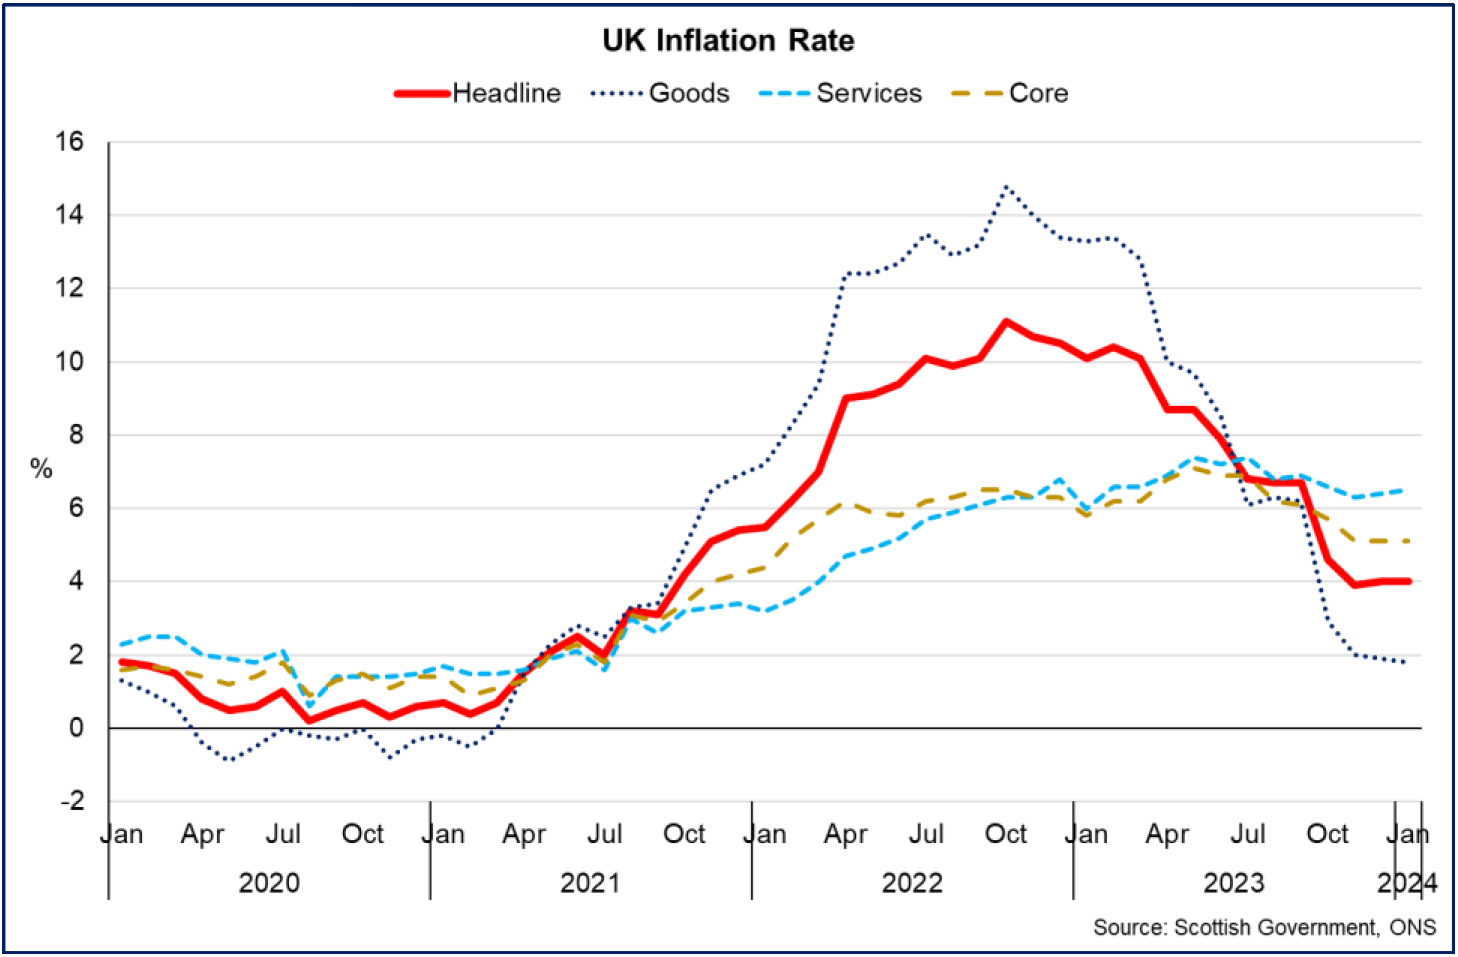 UK inflation remained at 4% in January 2024 with goods price inflation declining more quickly than services and core inflation